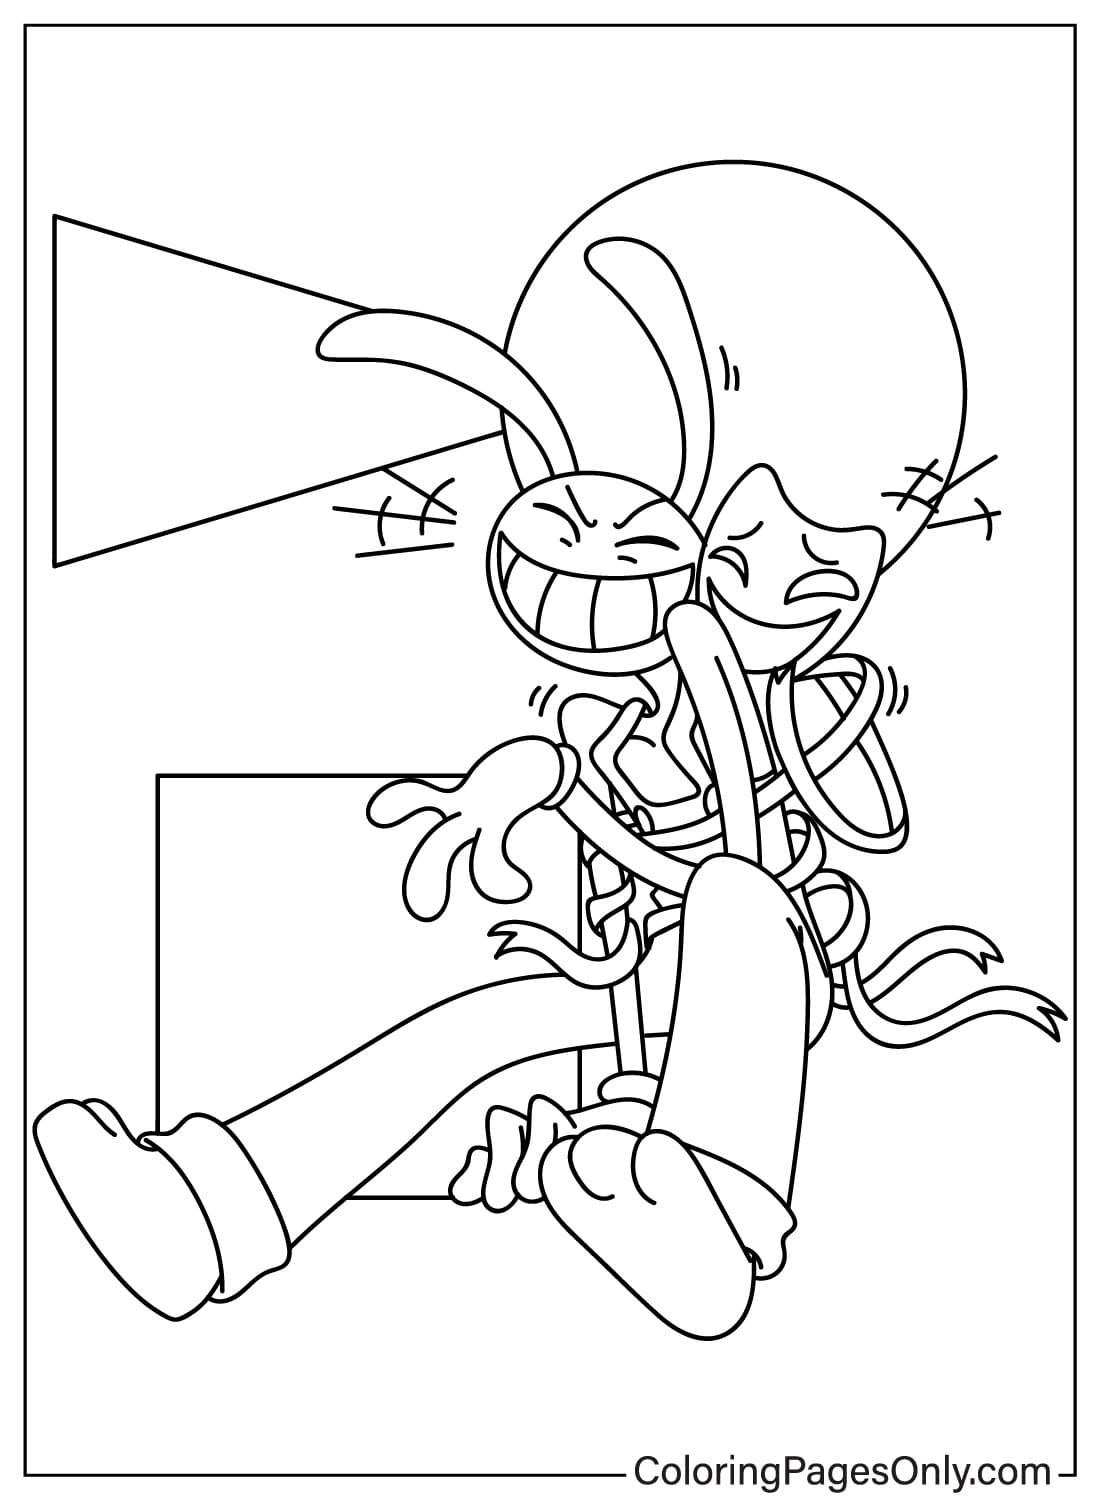 Jax, Gangle Coloring Page Printable from Gangle